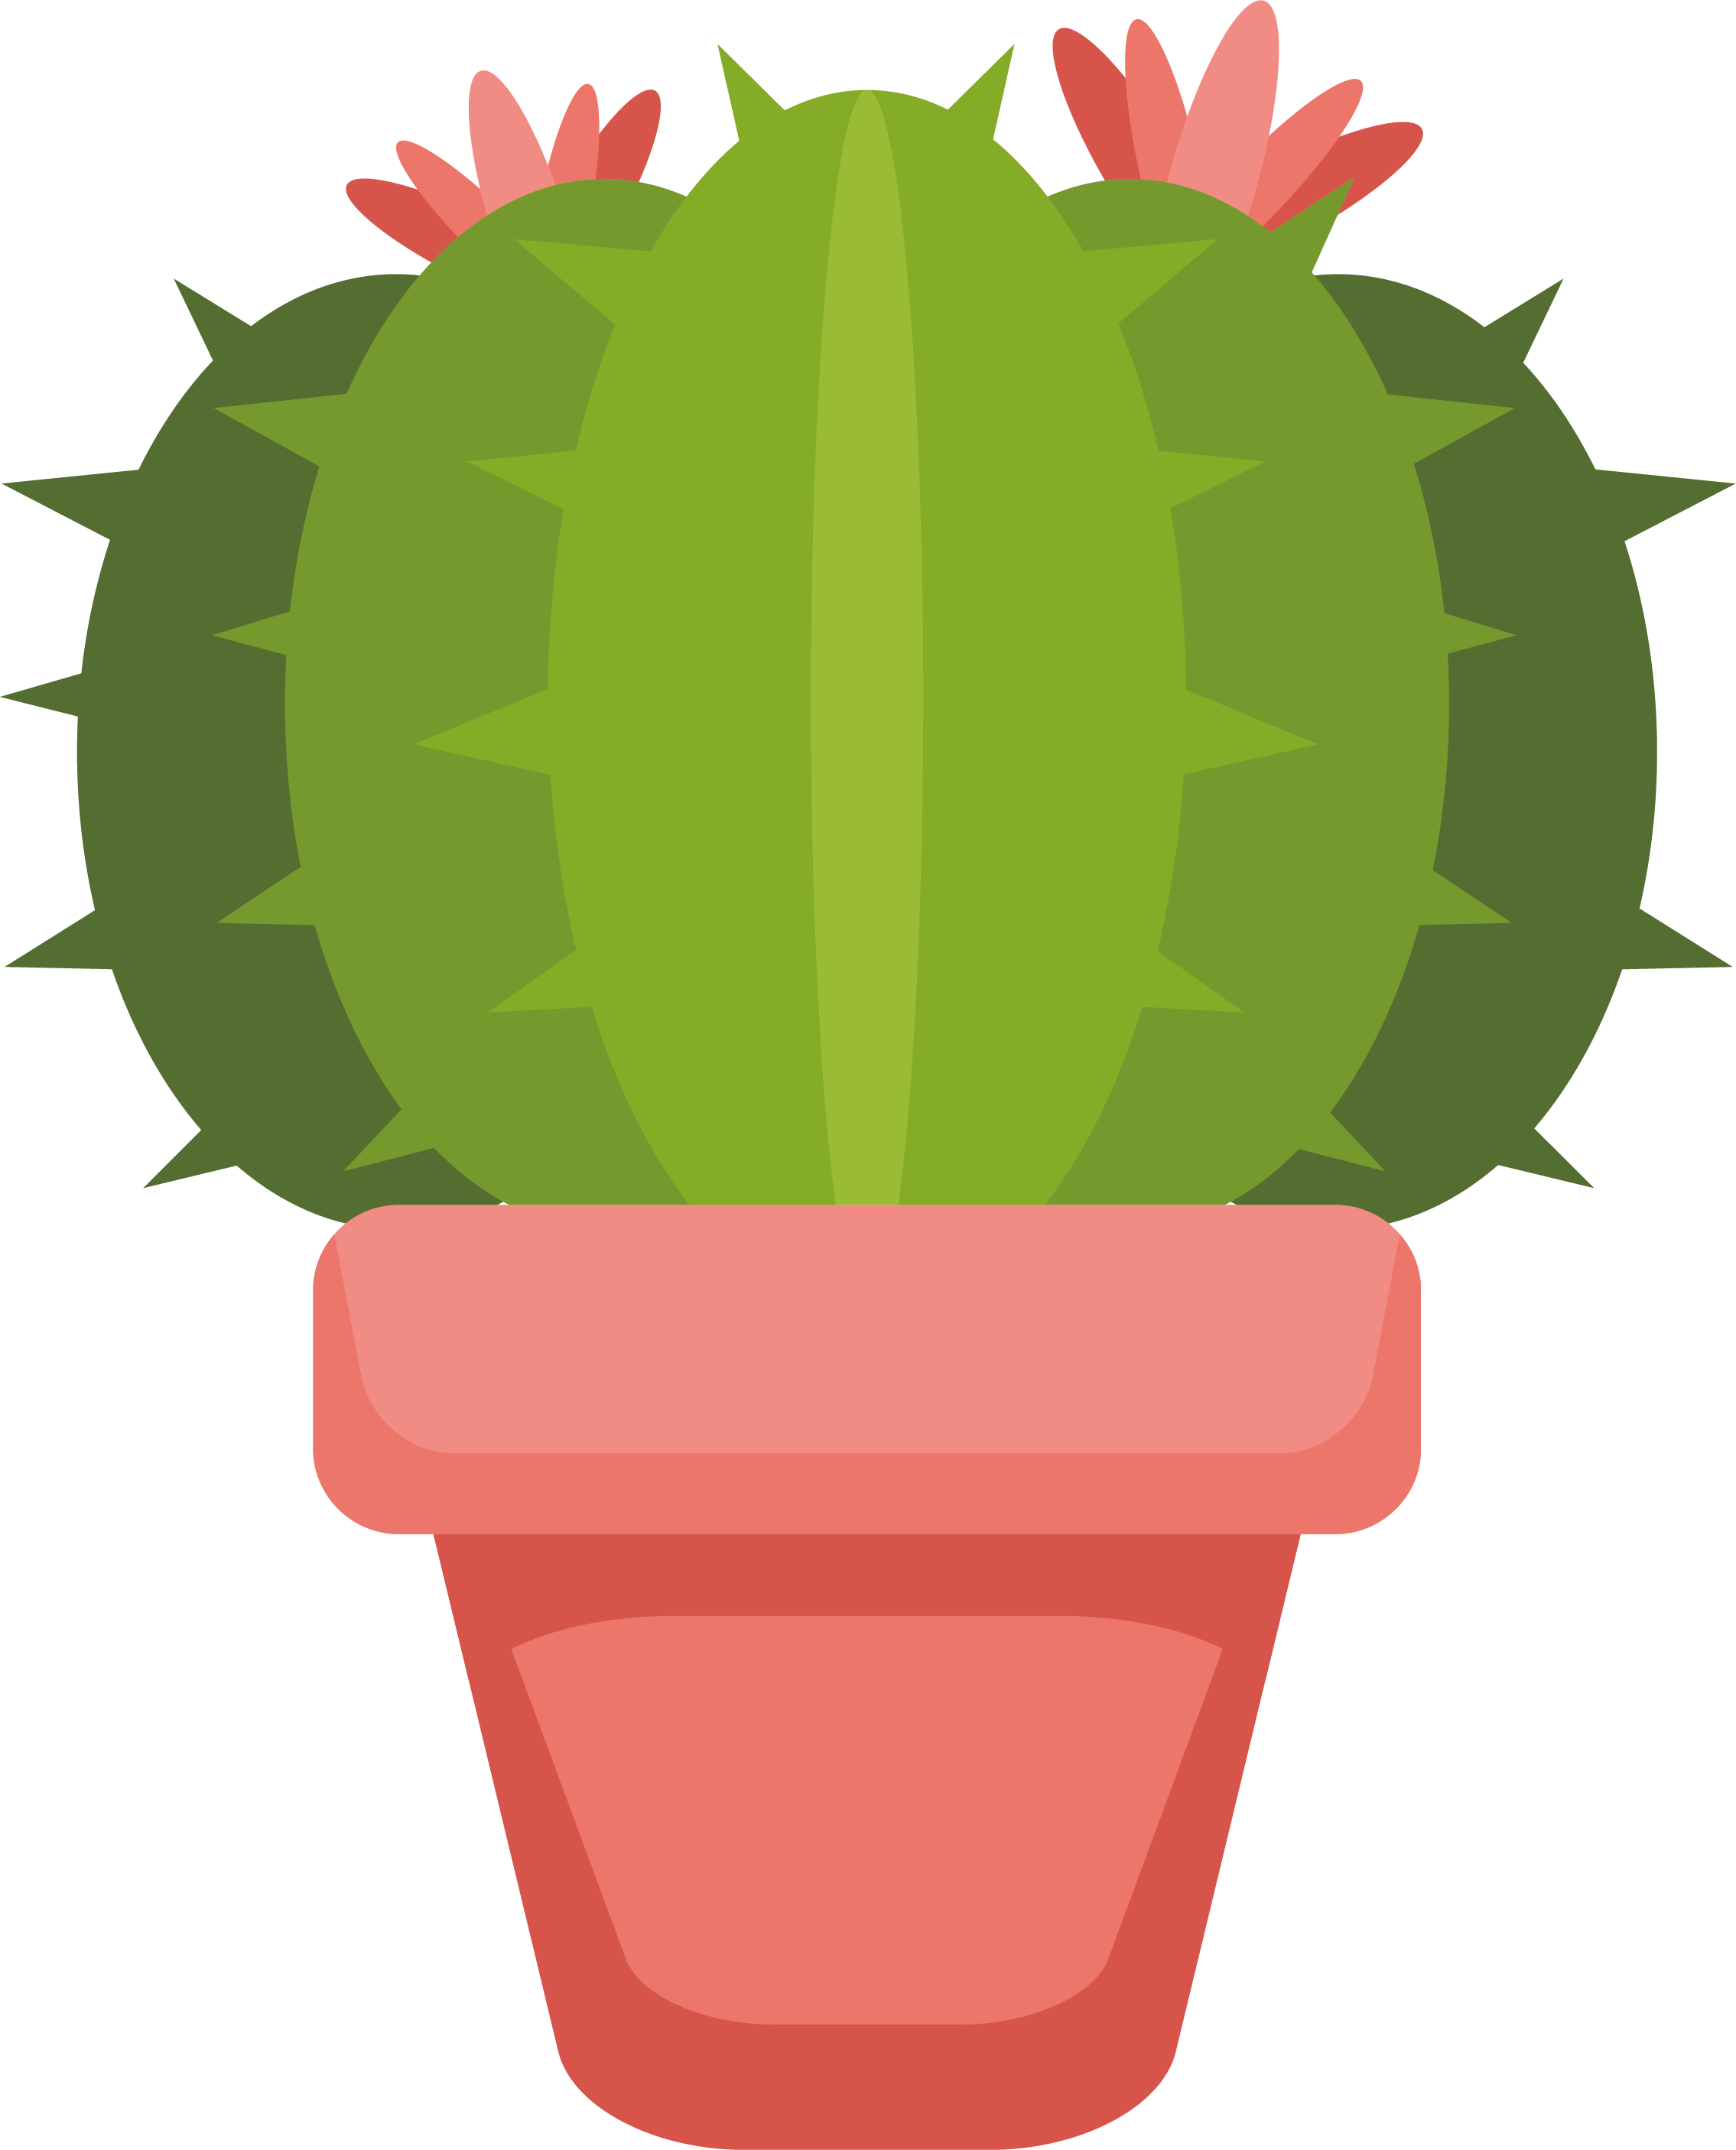 Tropical Plant Cactus Vector Free HQ Image PNG Image